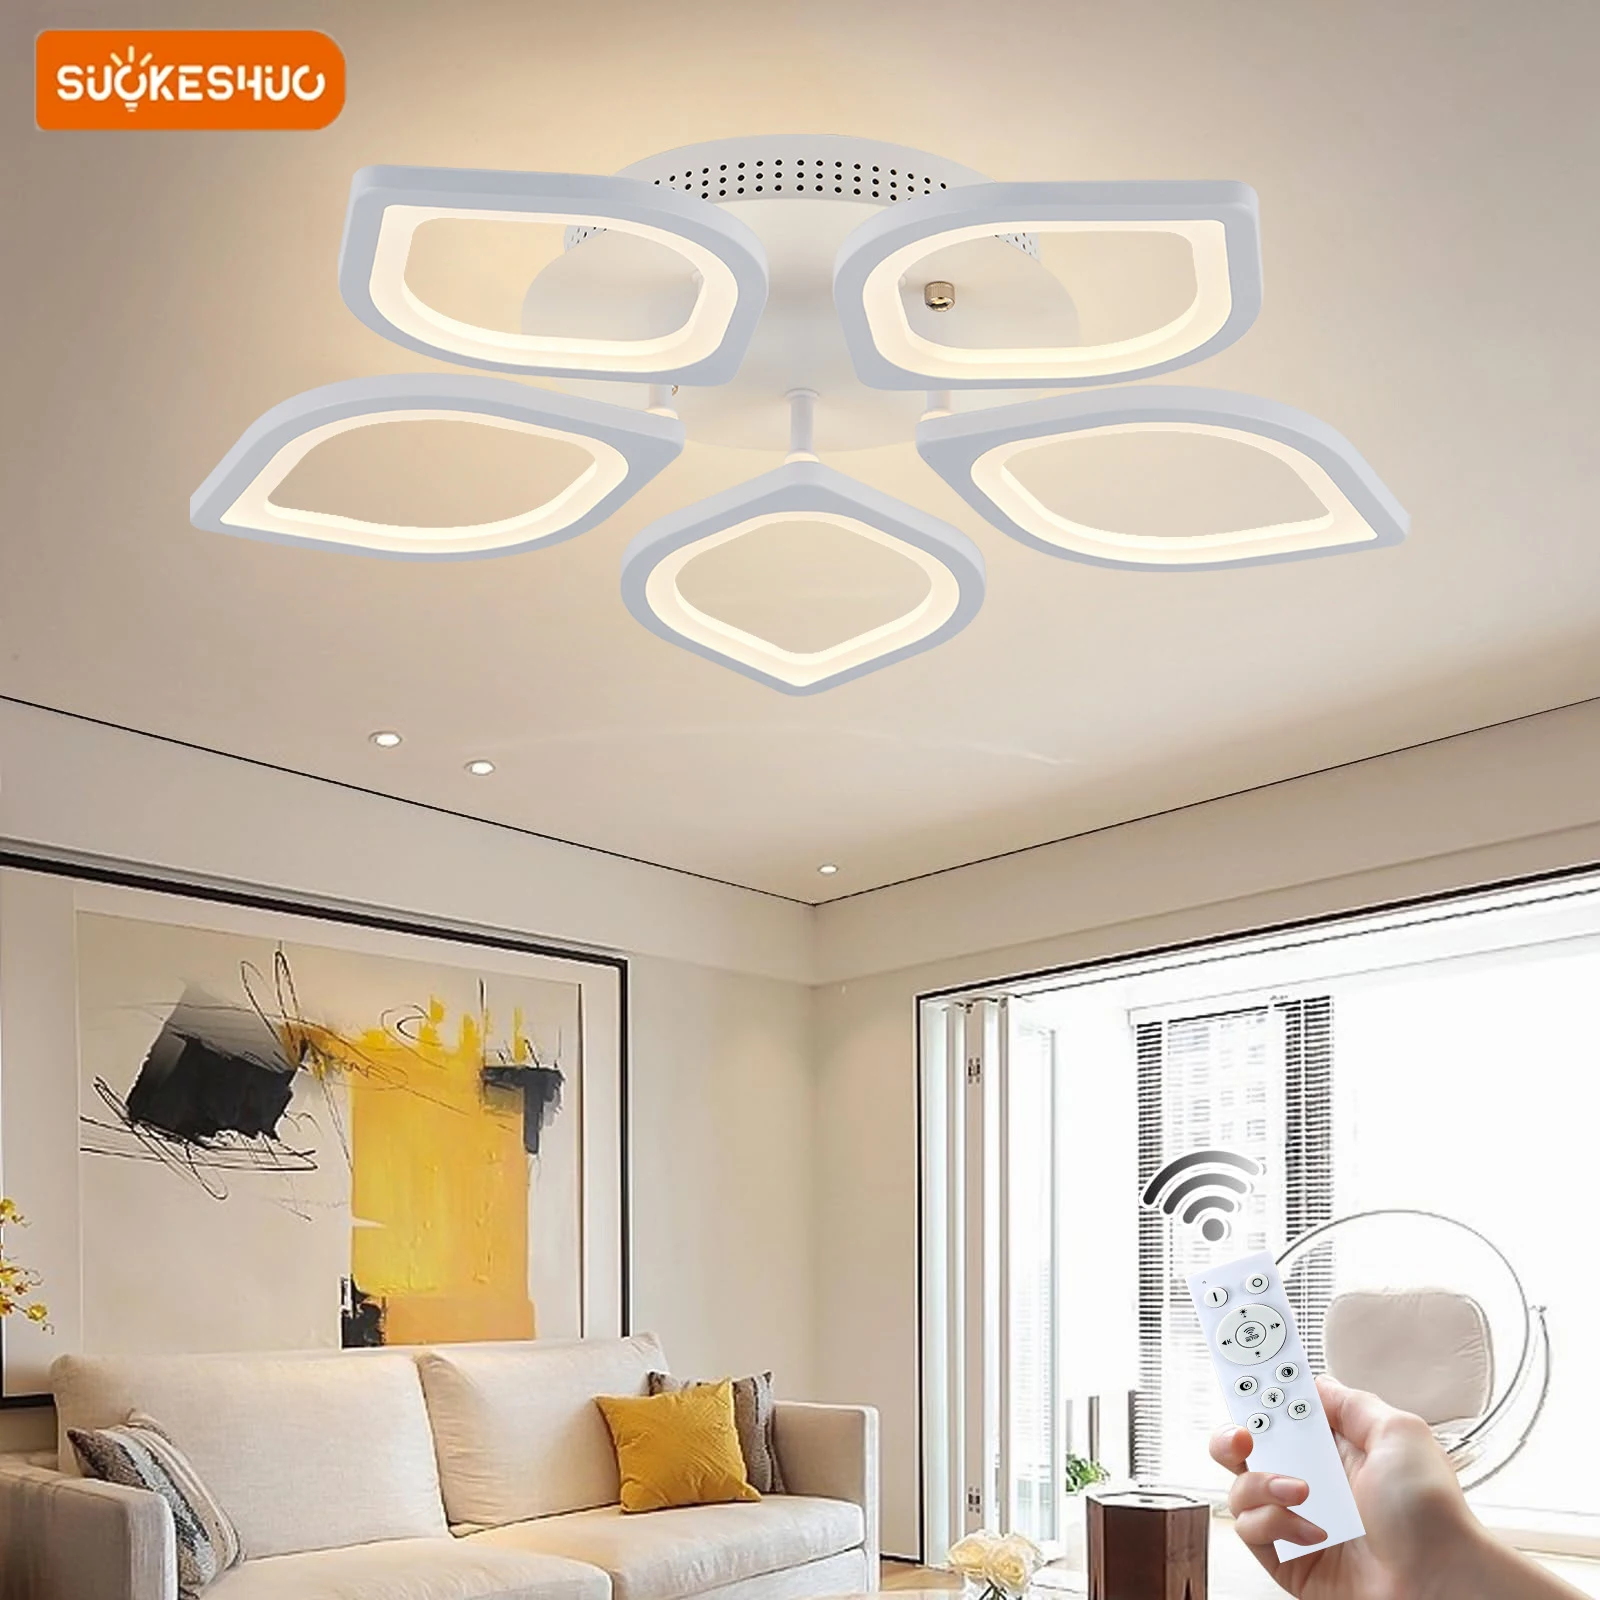 

SUOKESHUC Modern Minimalist Living Room LED Ceiling Lamp Remote Control For Home Use Grand Hall Bedroom Study Lighting Fixtures